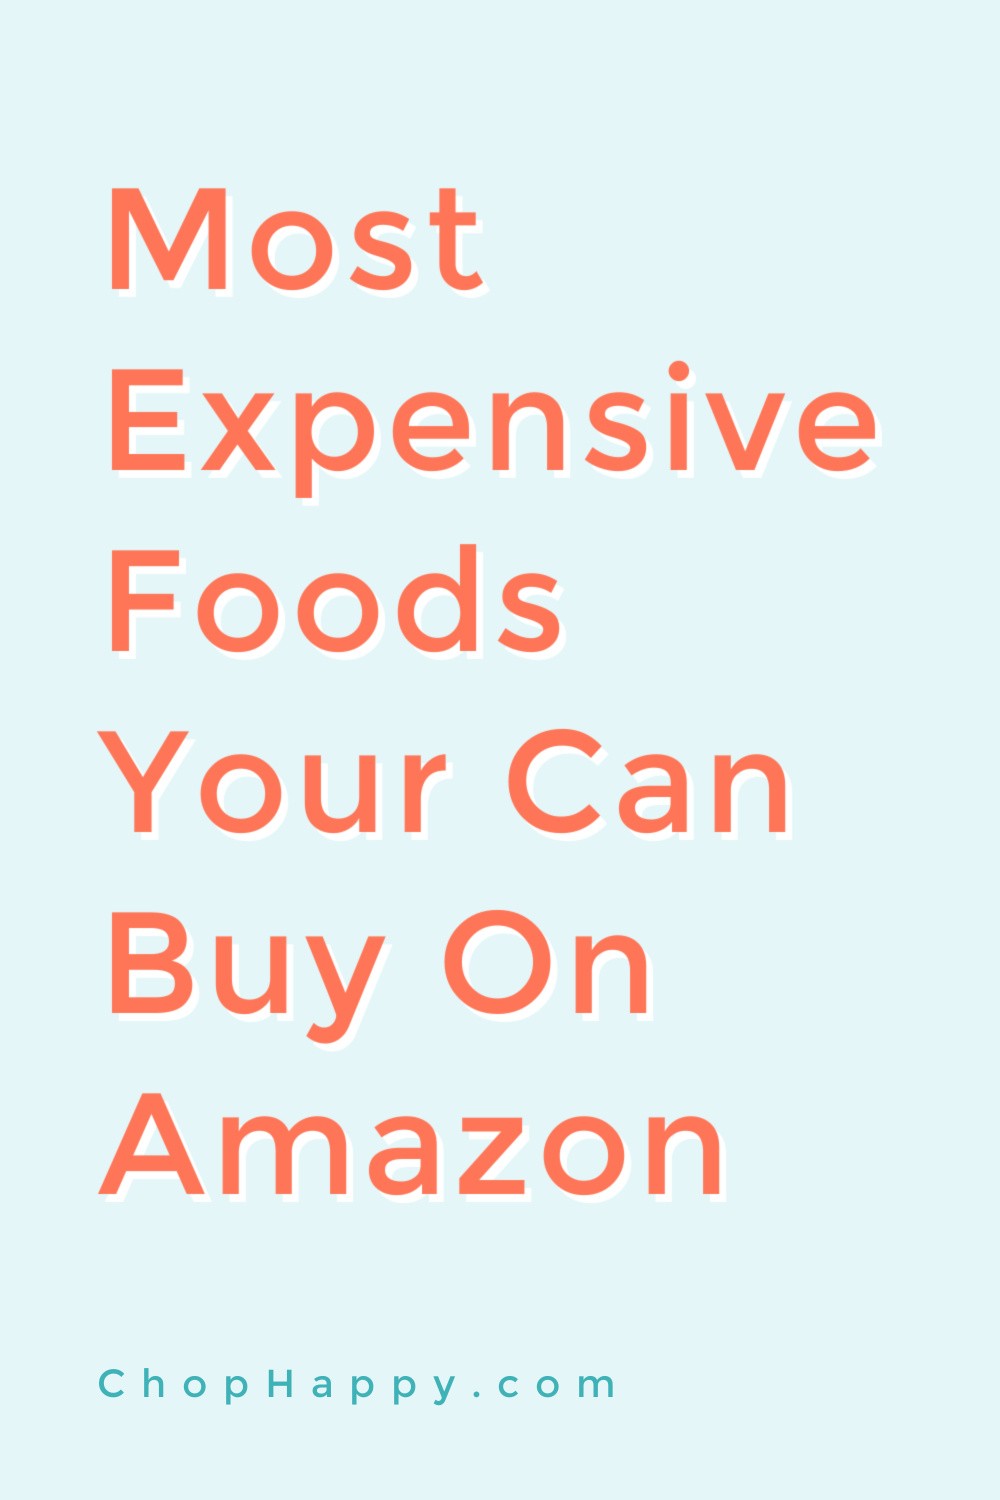 Most Expensive Foods Your Can Buy On Amazon. Steak, lobster, caviar, and saffron top the list of the most pricey foods you can buy on Amazon! Happy Shopping! www.ChopHappy.com #fancyfoods #foodgiftsideas